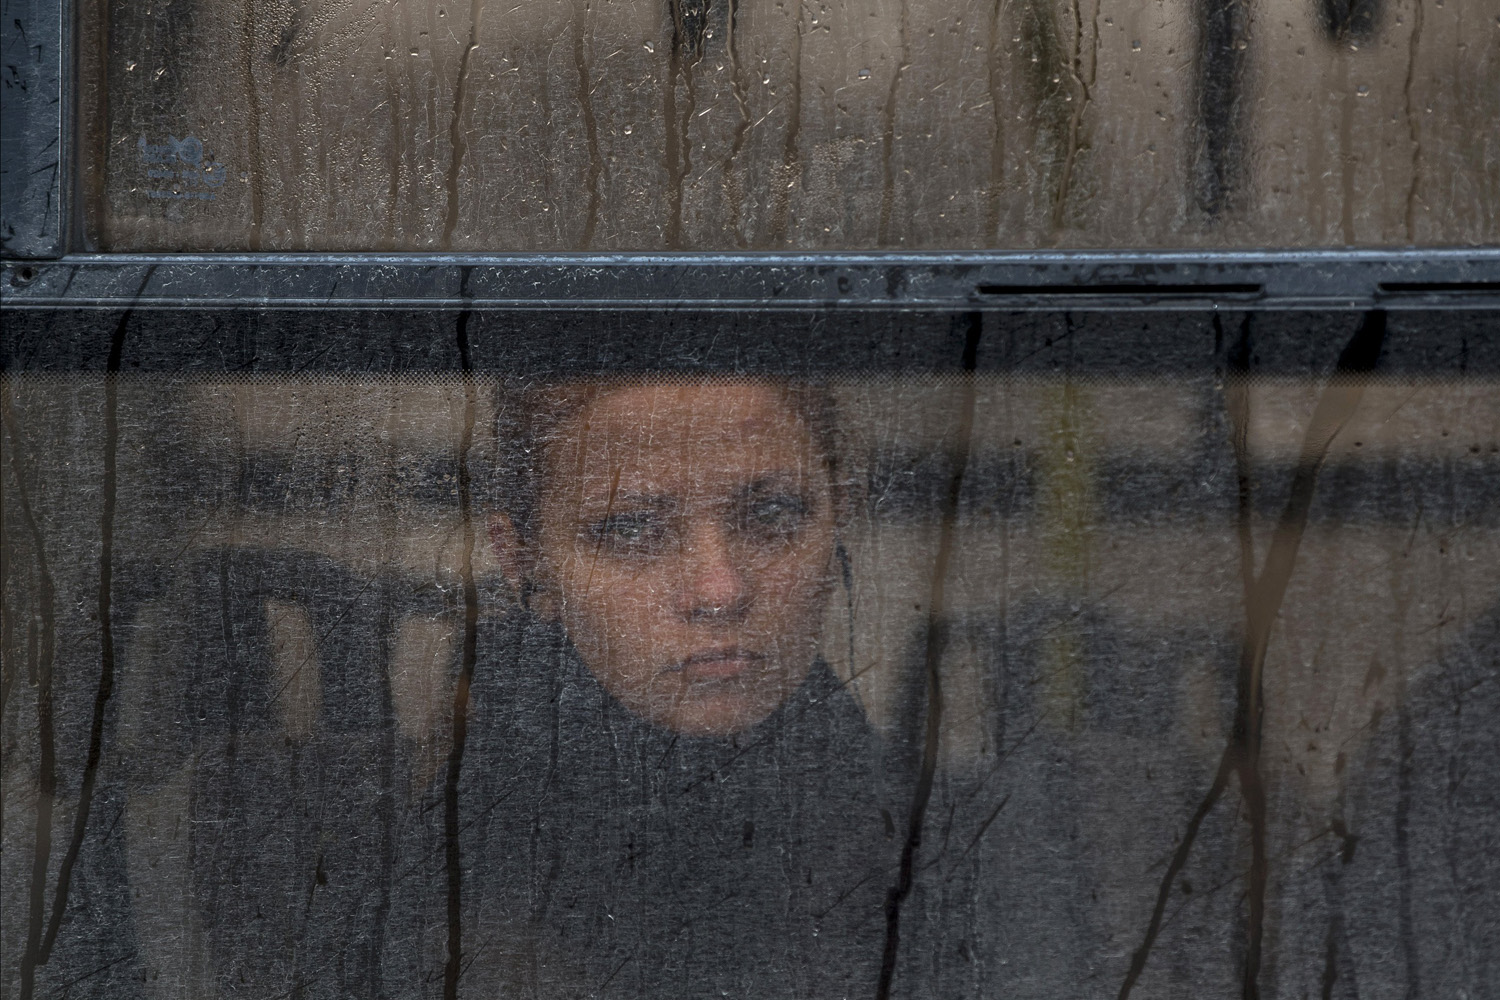 Mar. 7, 2014. A woman watches a rally against the breakup of the country from behind the tinted window of a bus in Simferopol, Ukraine.